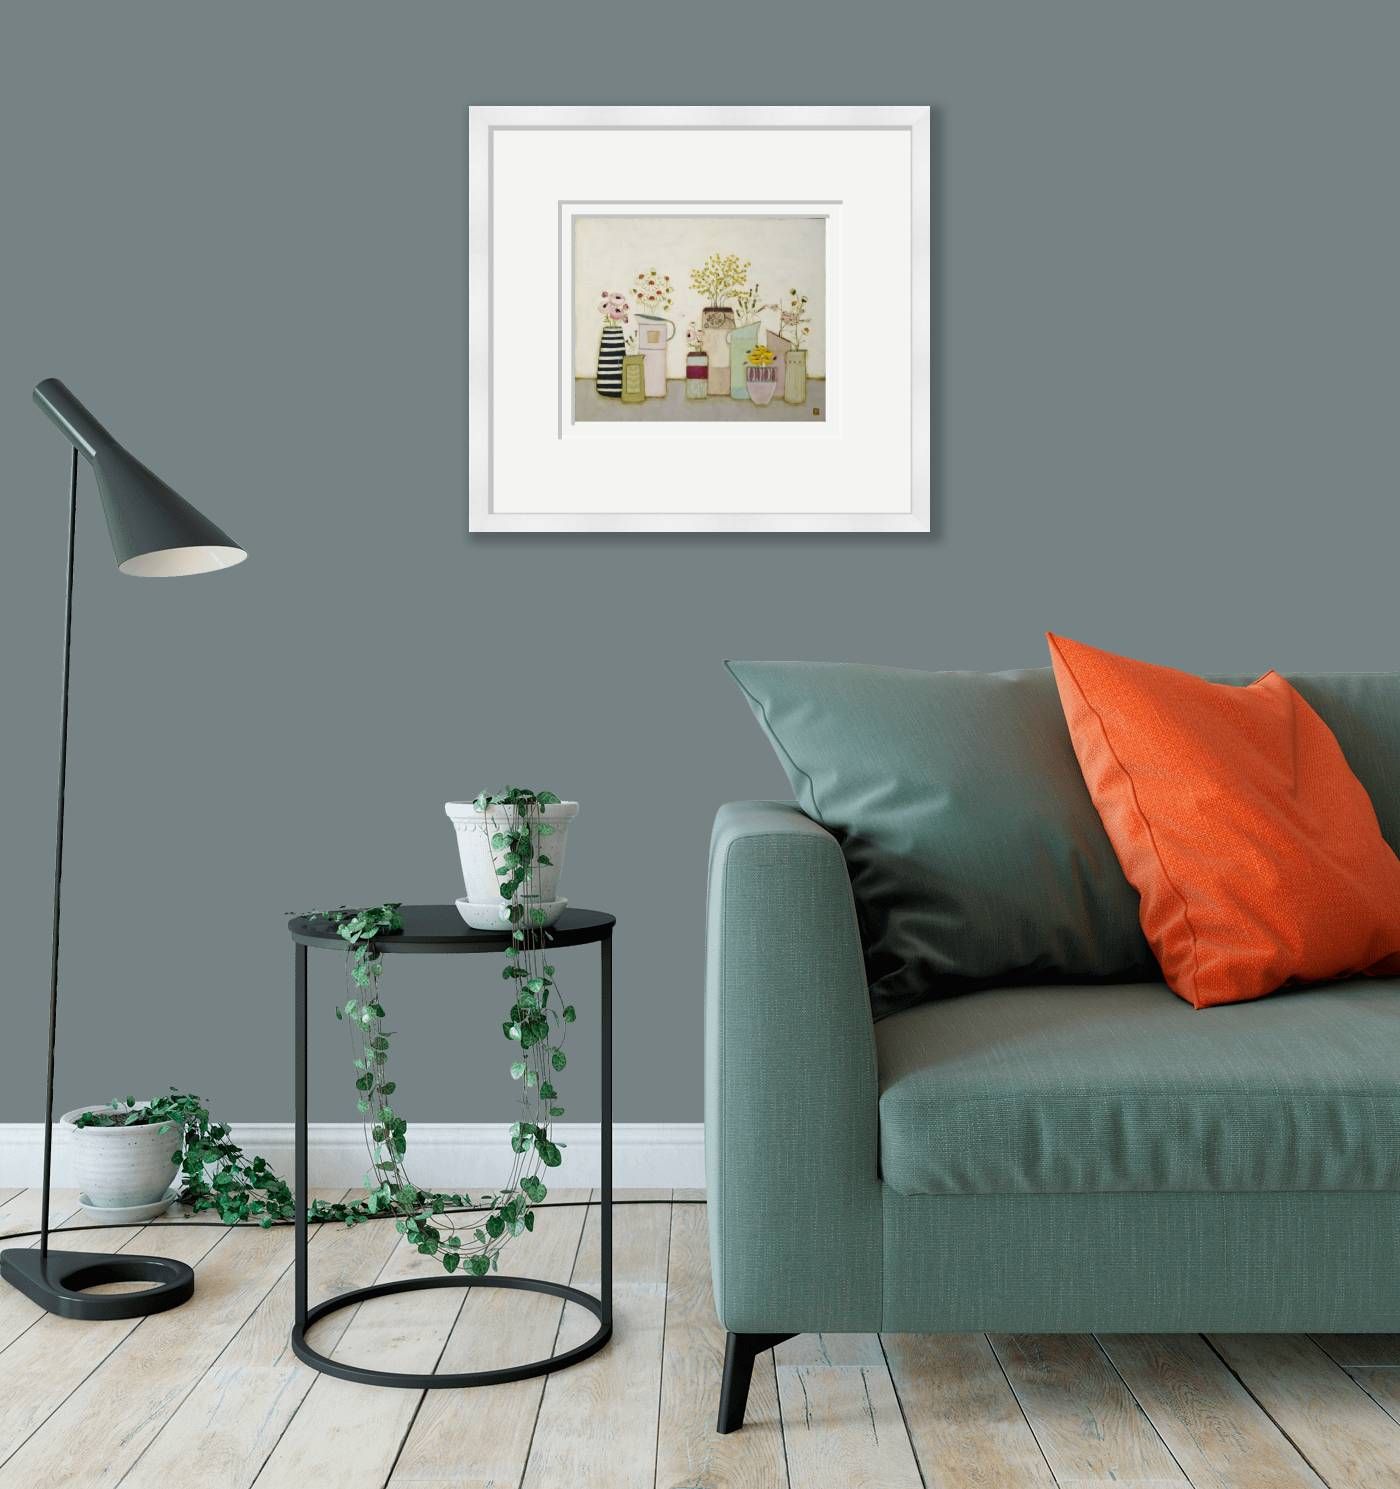 Medium framed - A wild array of Blooms by Eithne  Roberts